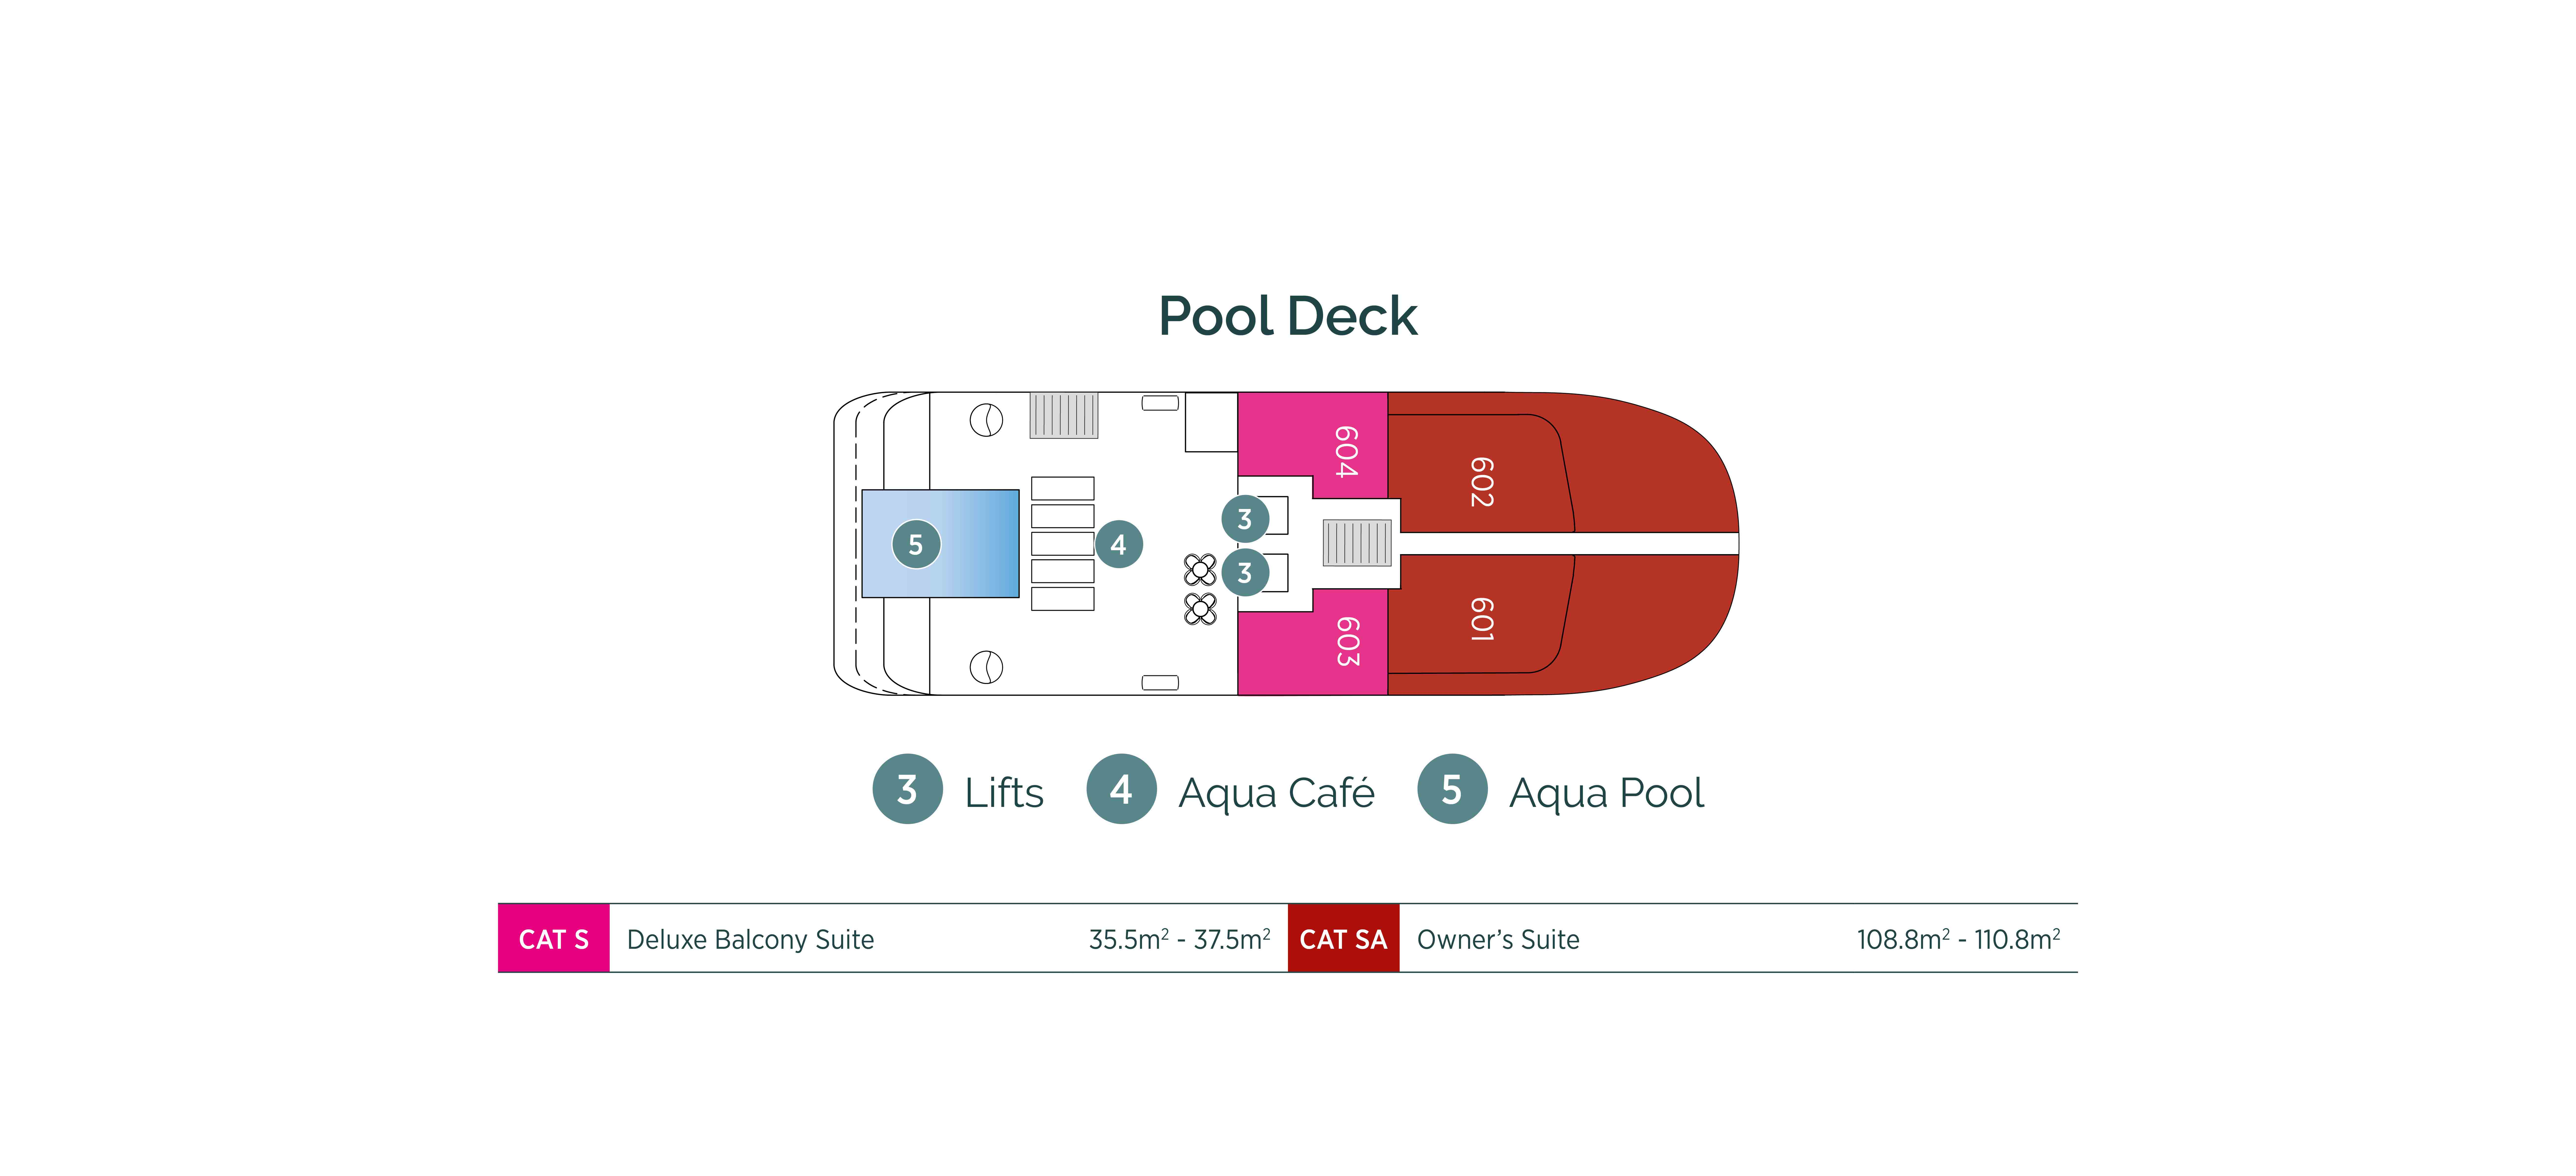 Diagram of ship layout for the Pool Deck of an Emerald Cruises luxury yacht